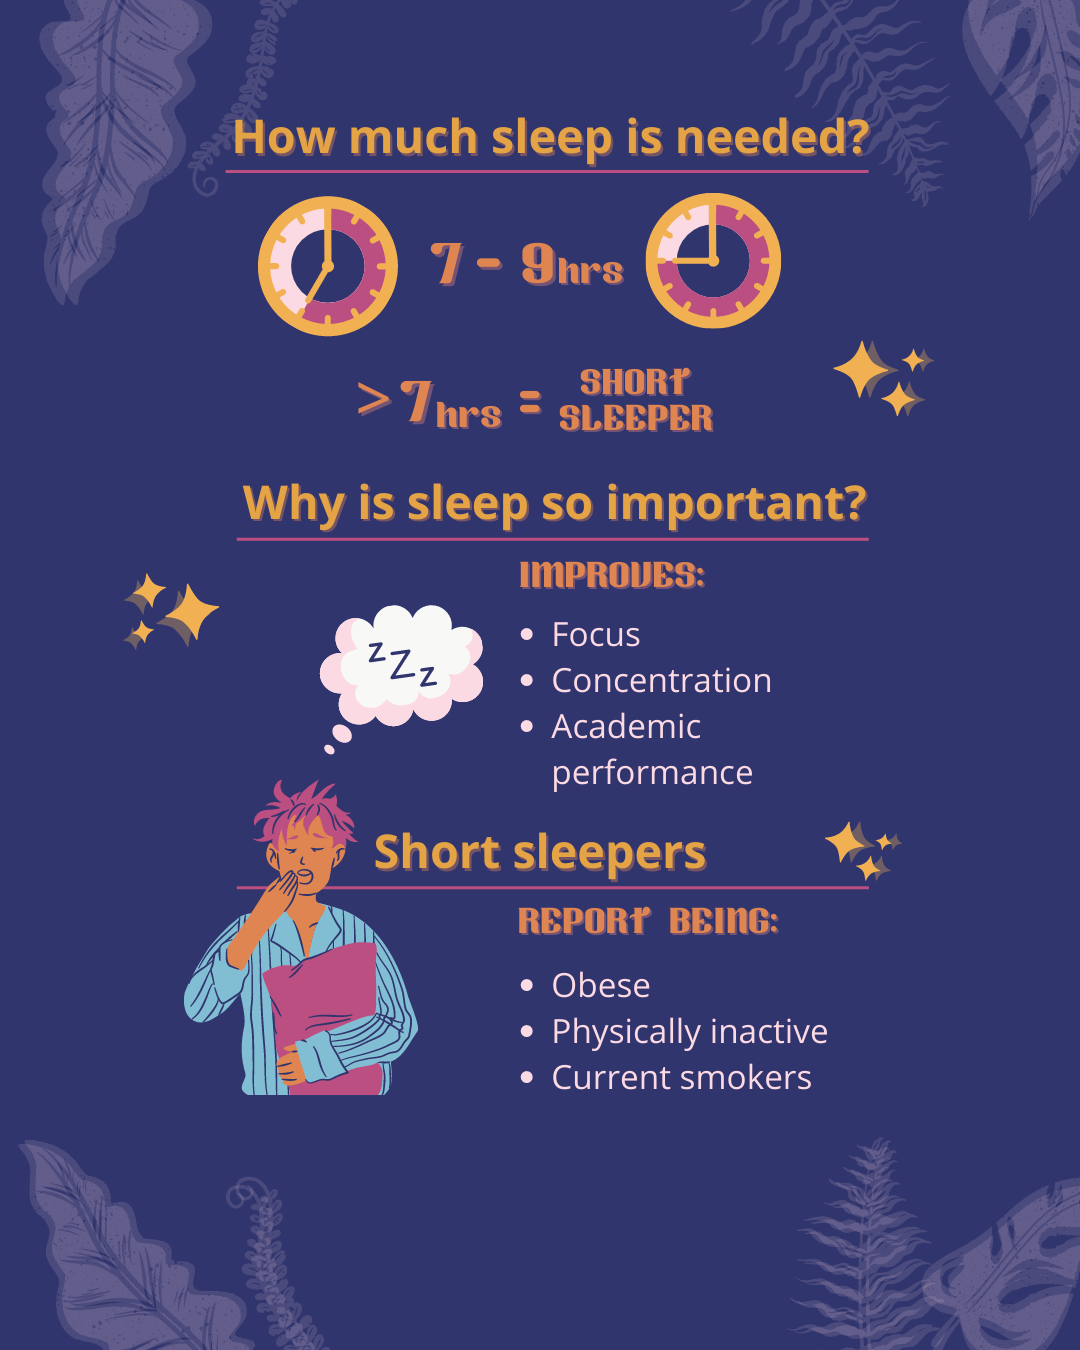 Sleep info- how much is needed and why is it important